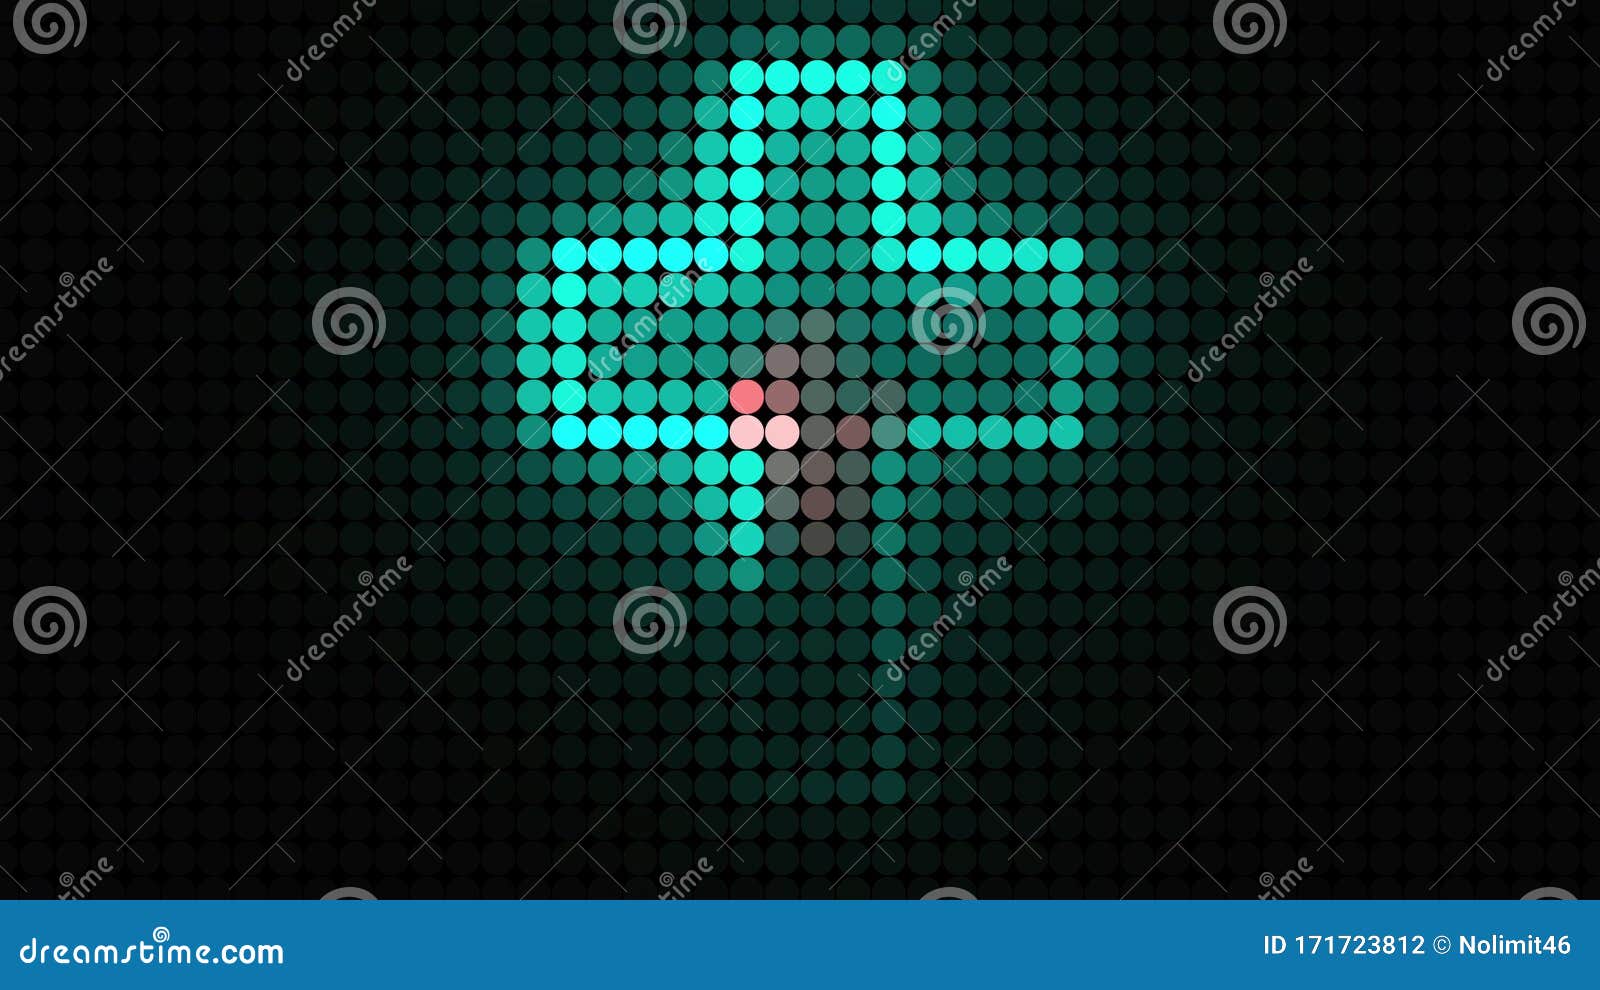 computer generated bright display of running dottes lights. 3d rendering of led background